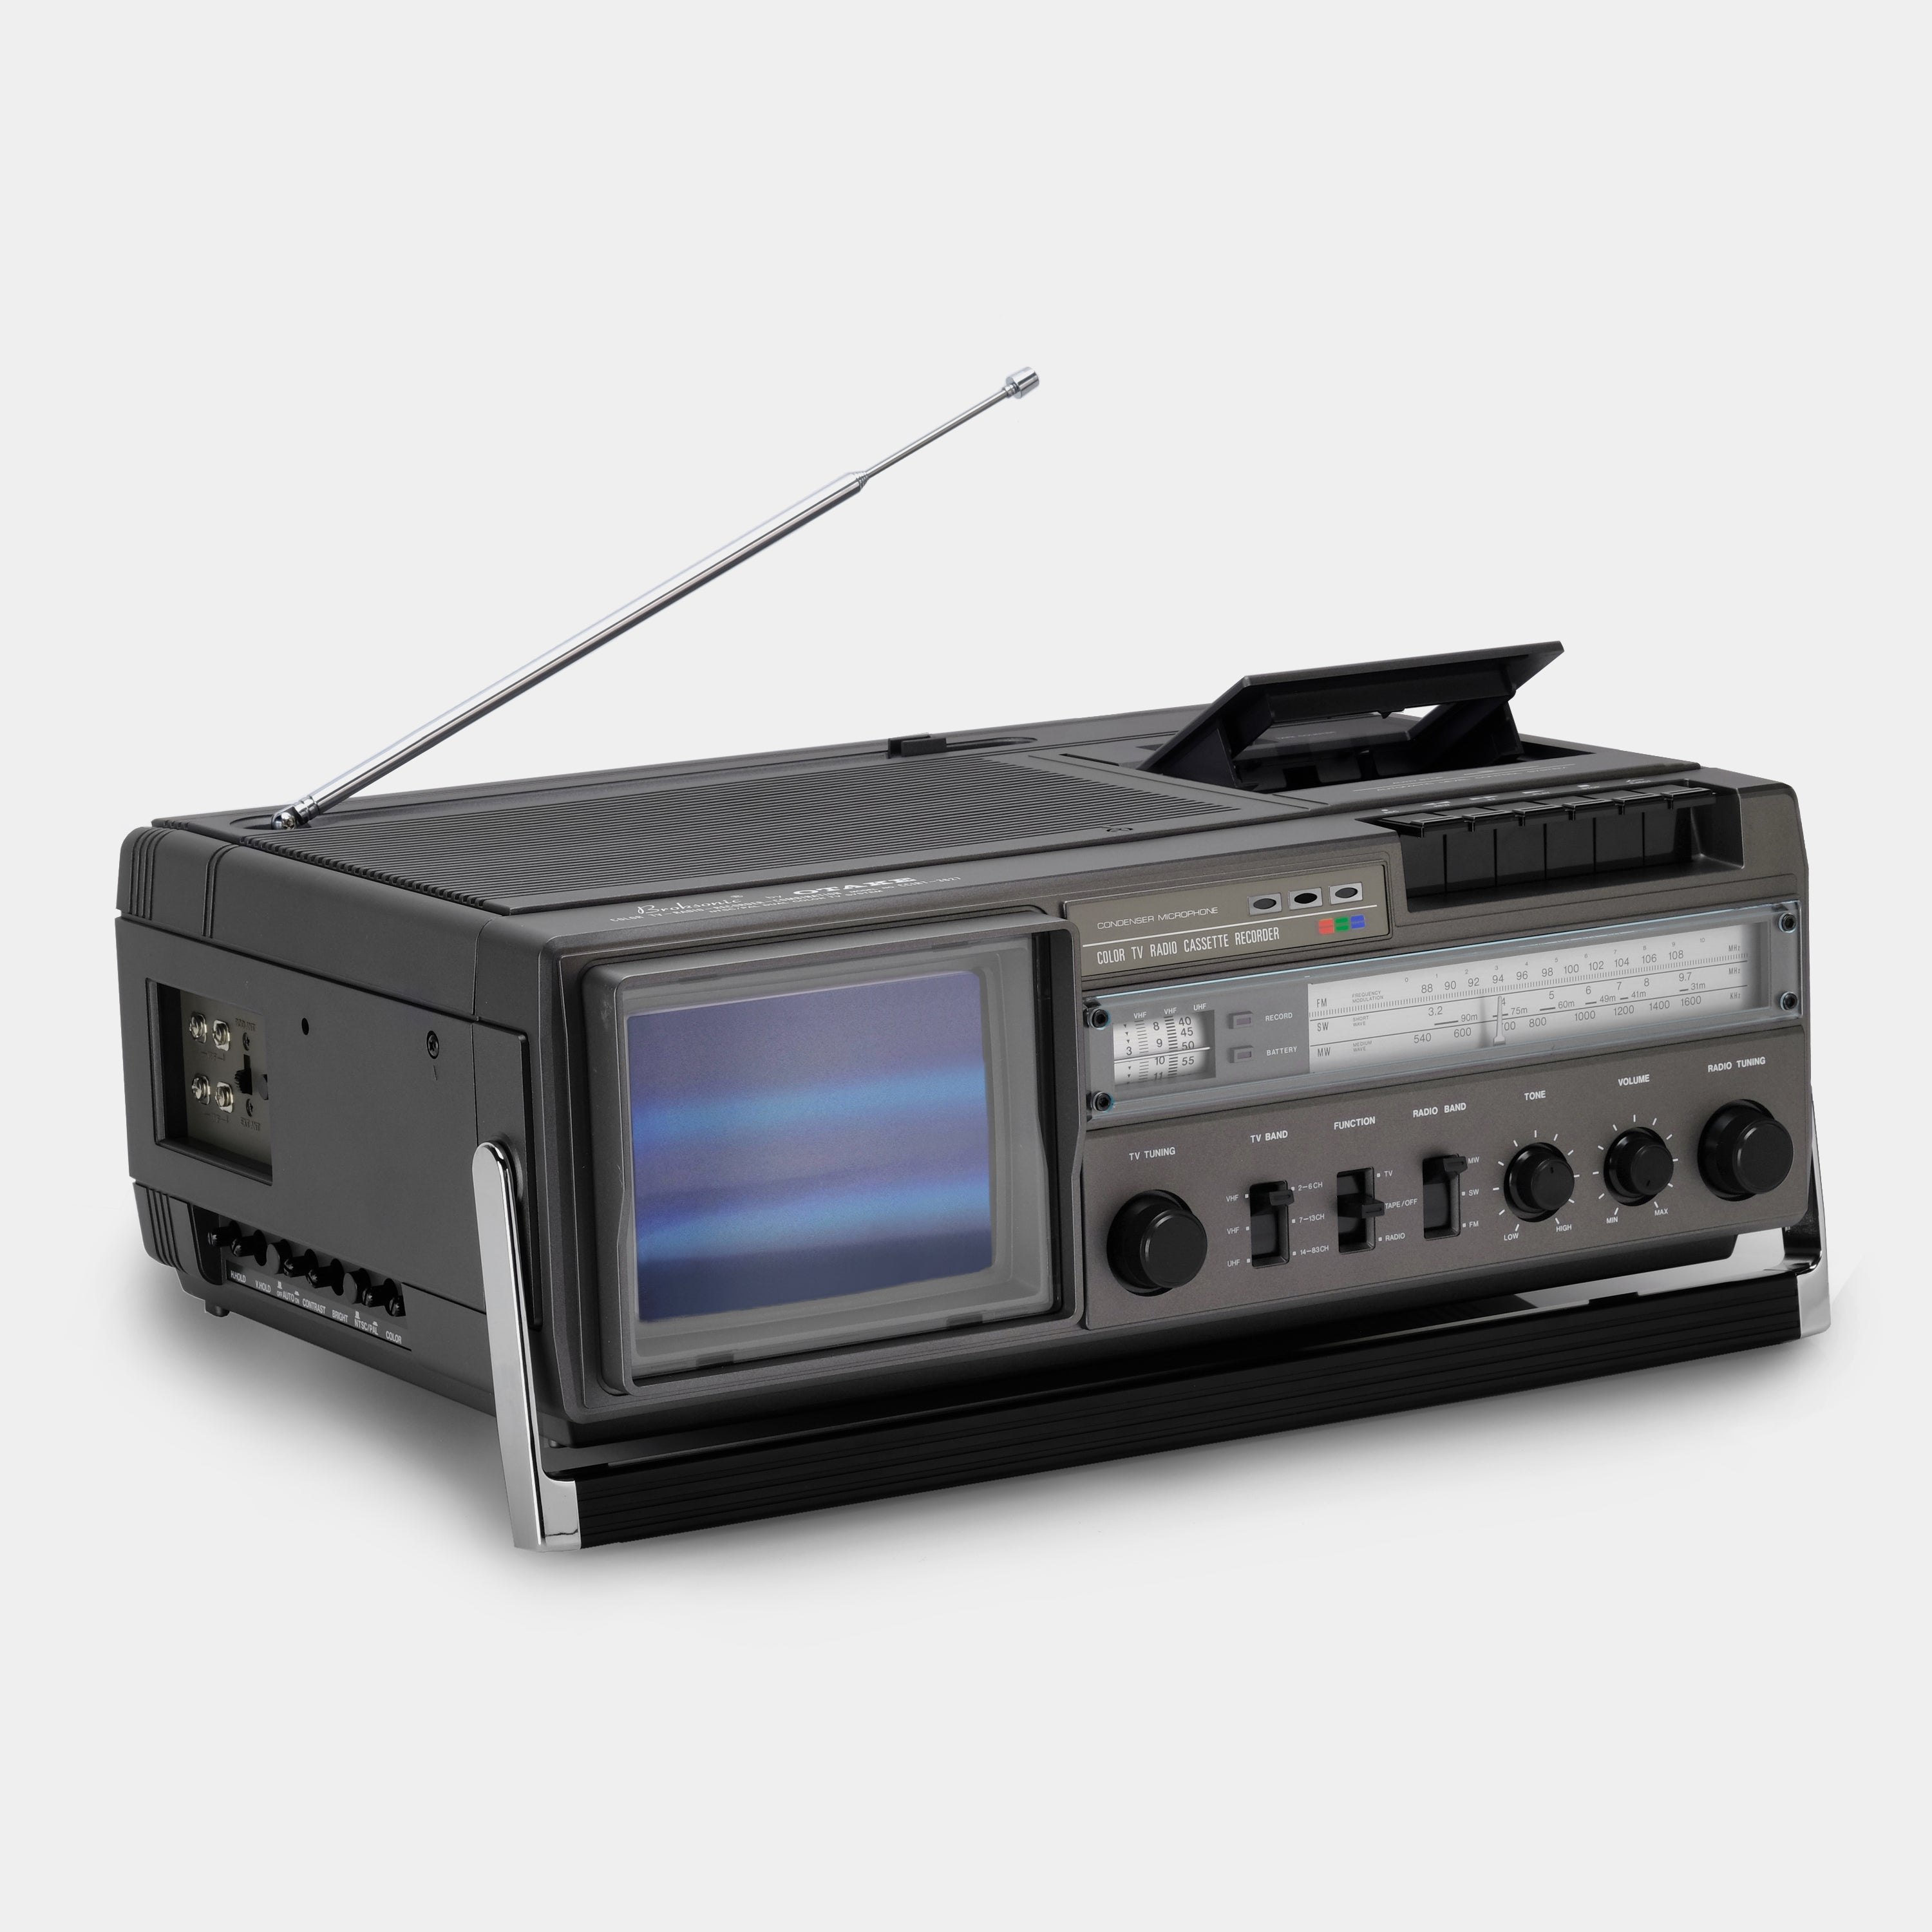 Broksonic by Otake CCIRT-3627 5.5 Inch Color TV with MW/FM/SW Radio and Cassette Recorder (Refurbished)